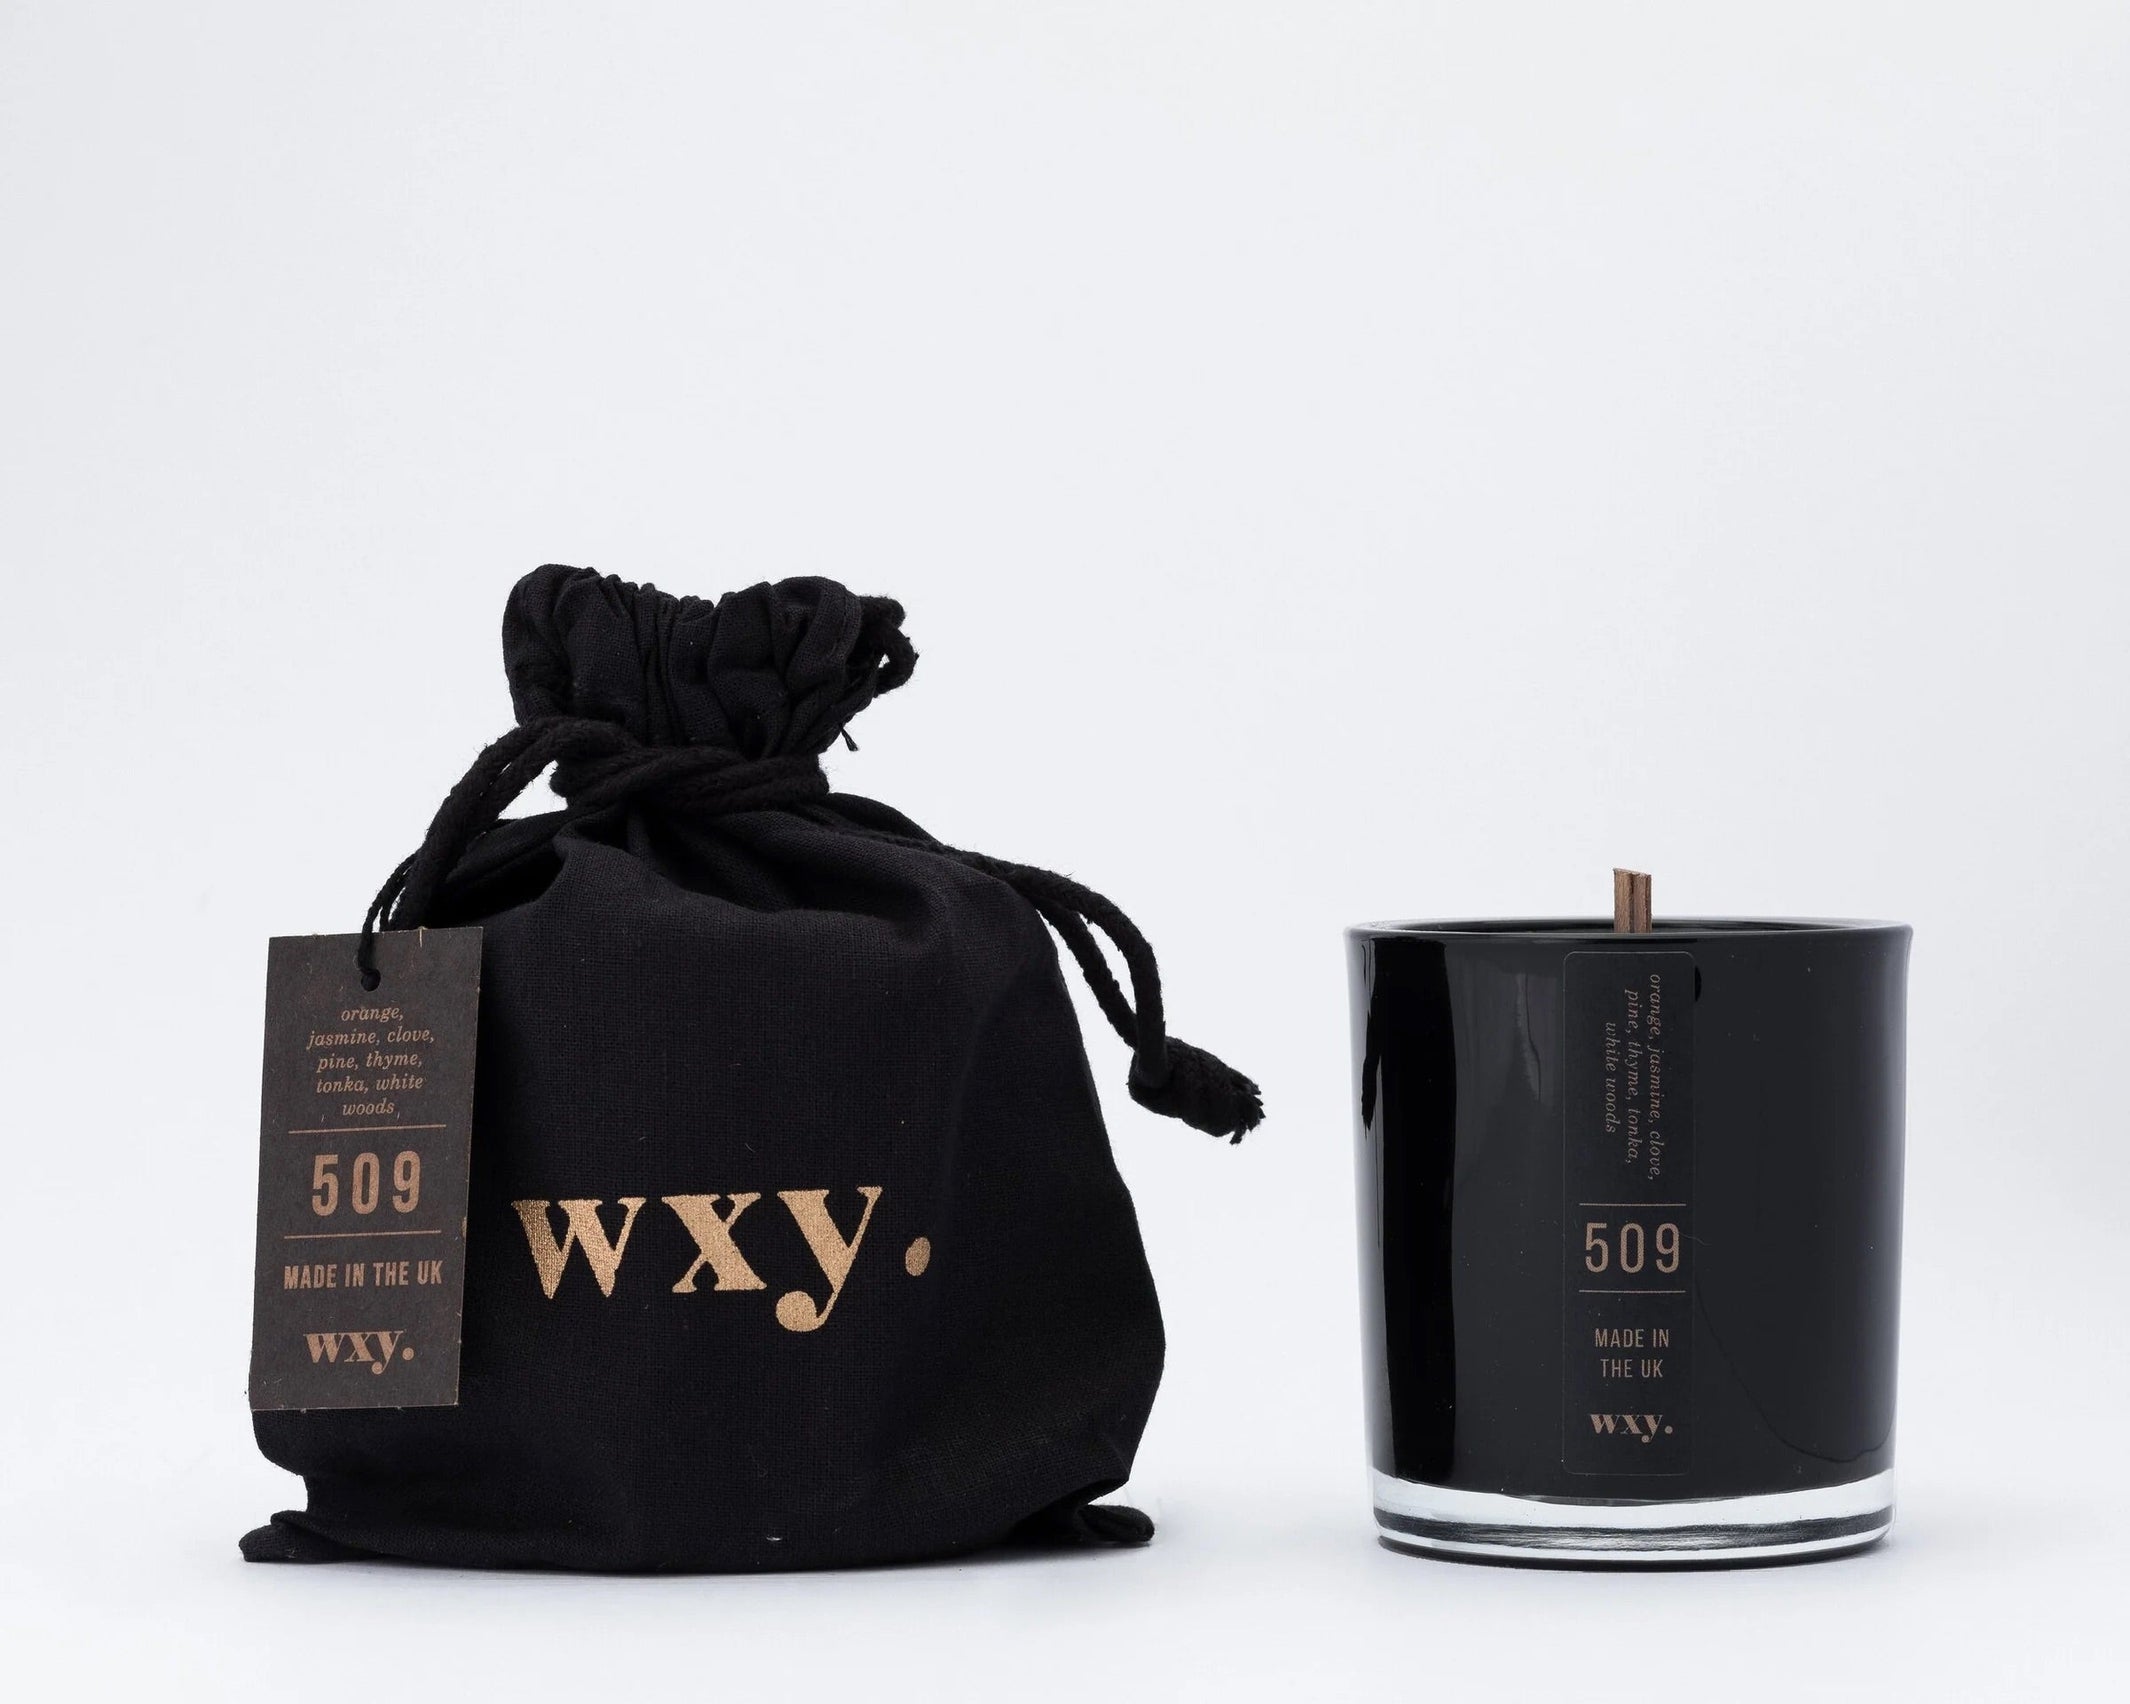 wxy 509 The Heart Warmer Candle 5oz#size_5oz